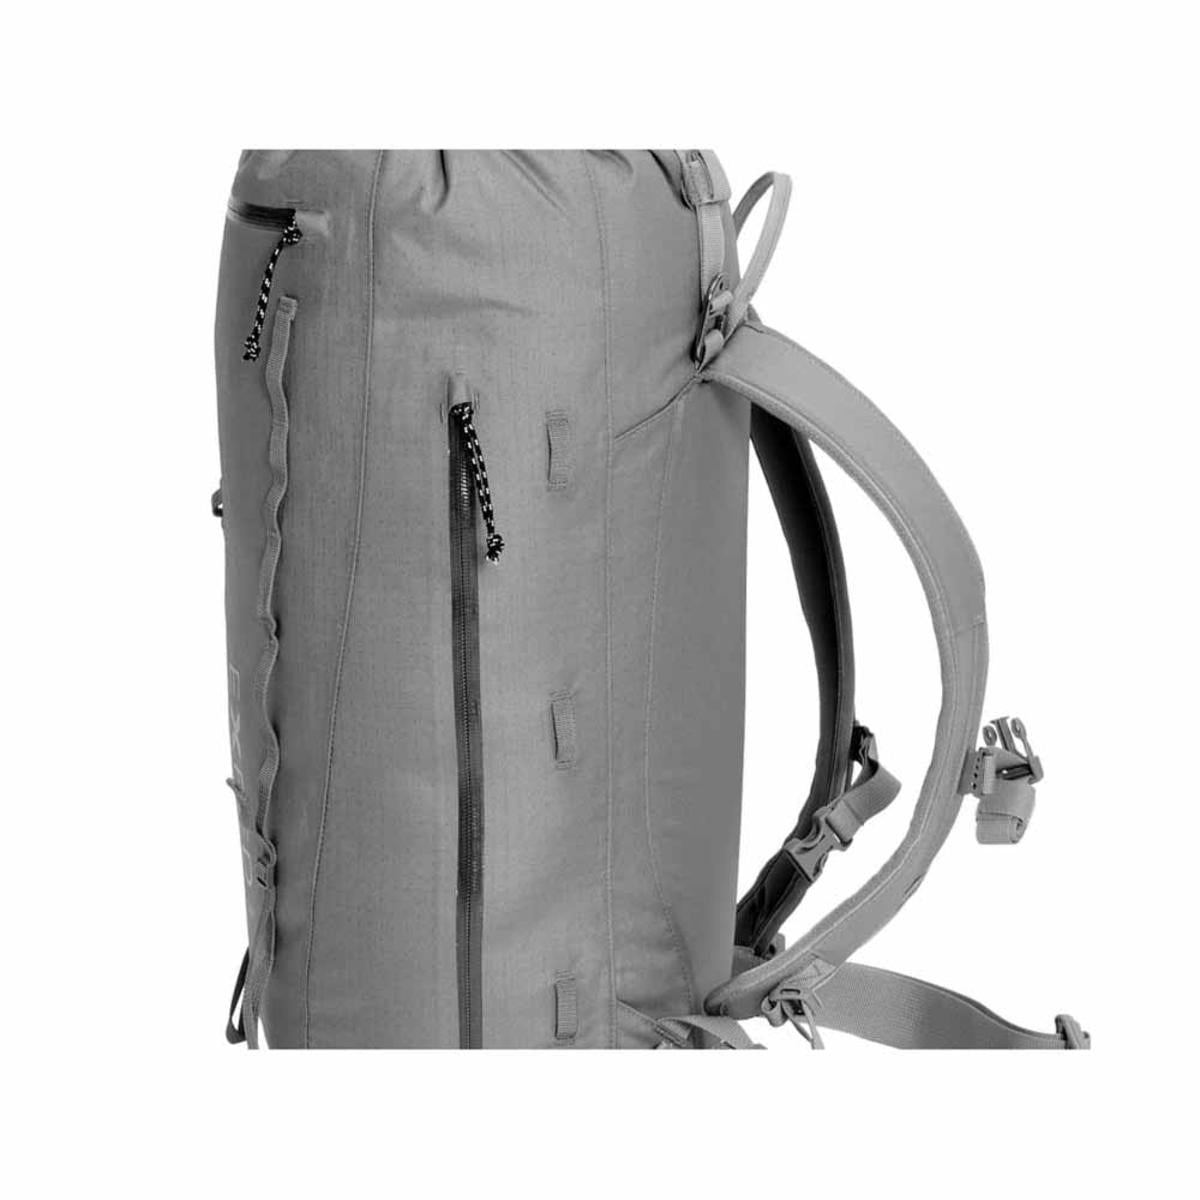 Exped Serac 35L Backpack